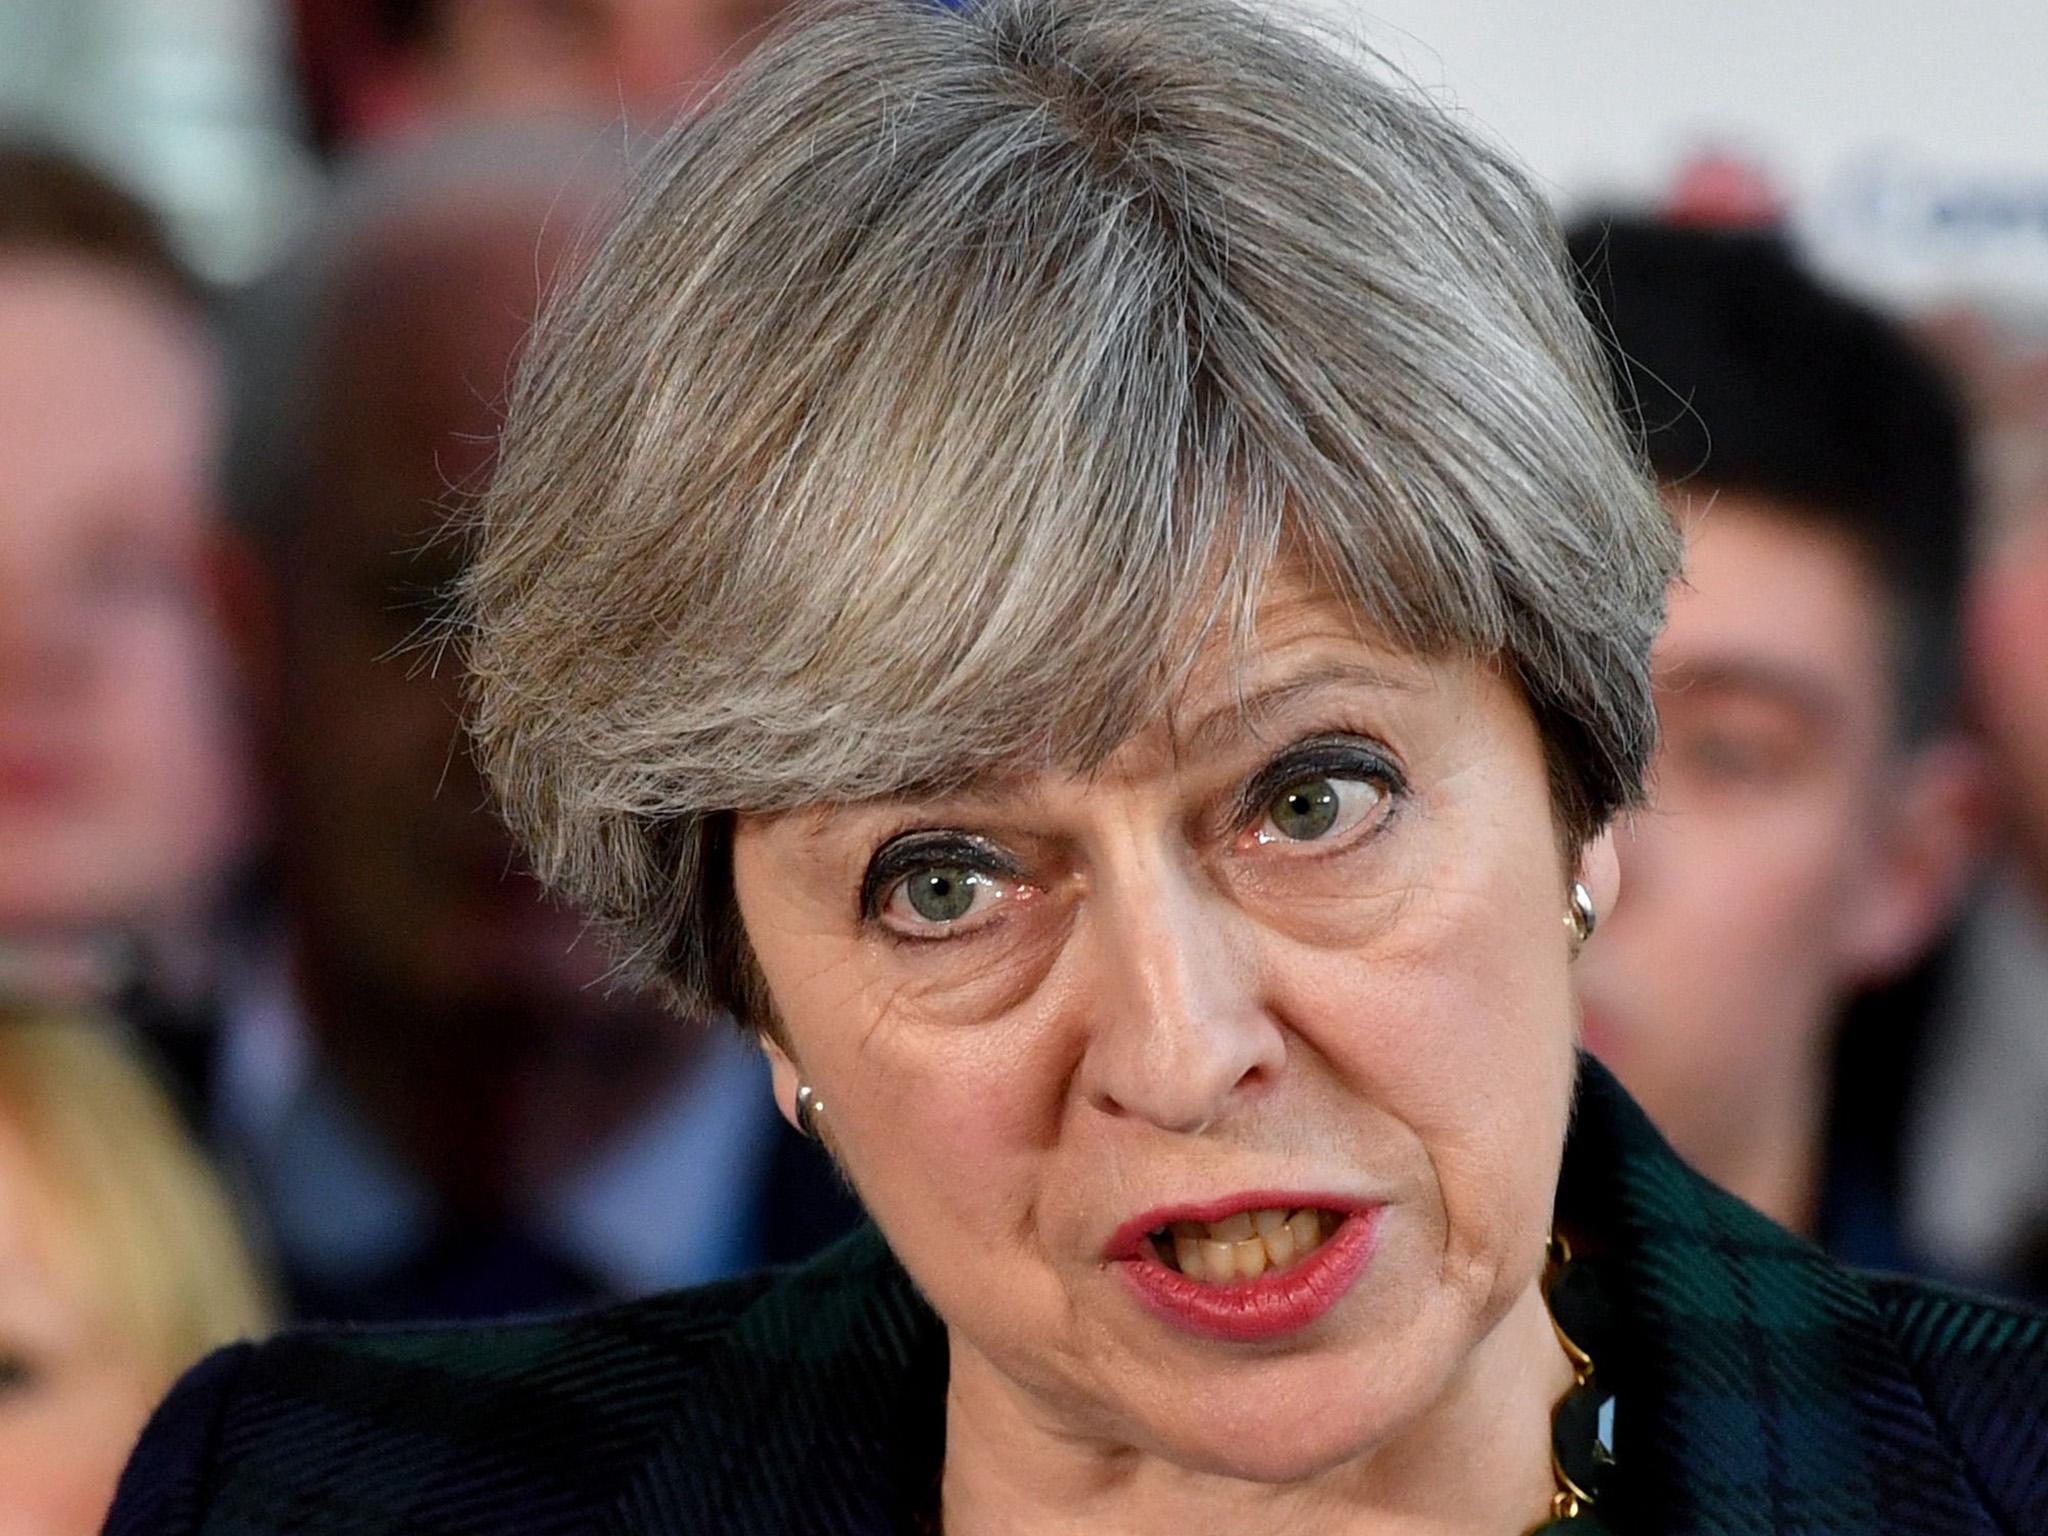 Theresa May has spoken about “unsustainable levels” of immigration